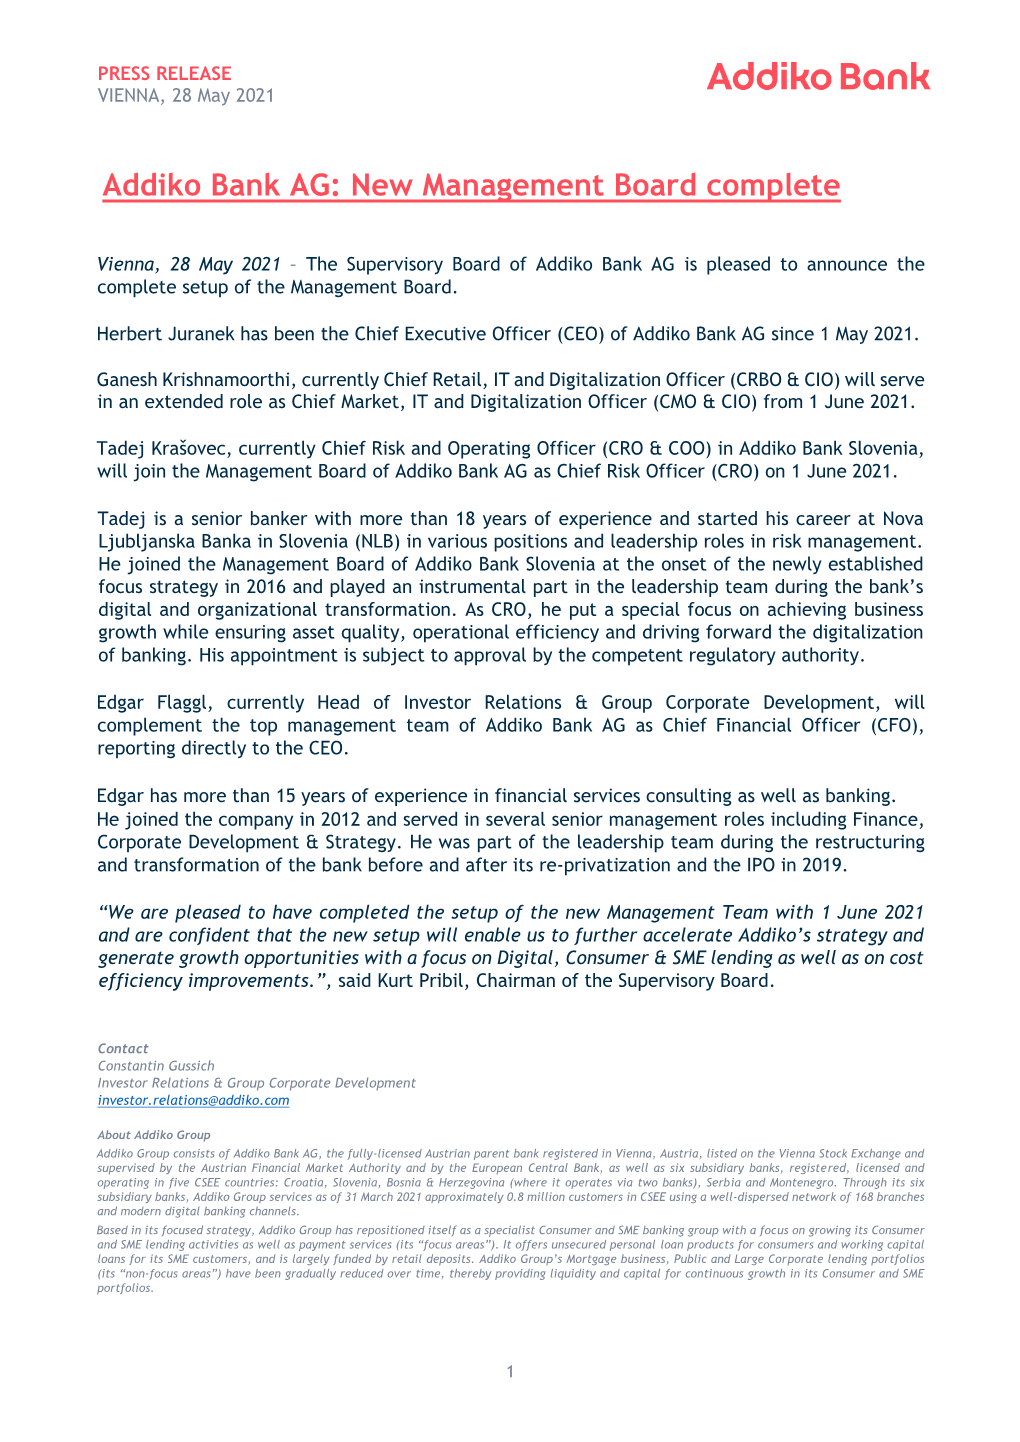 PRESS RELEASE VIENNA, 28 May 2021